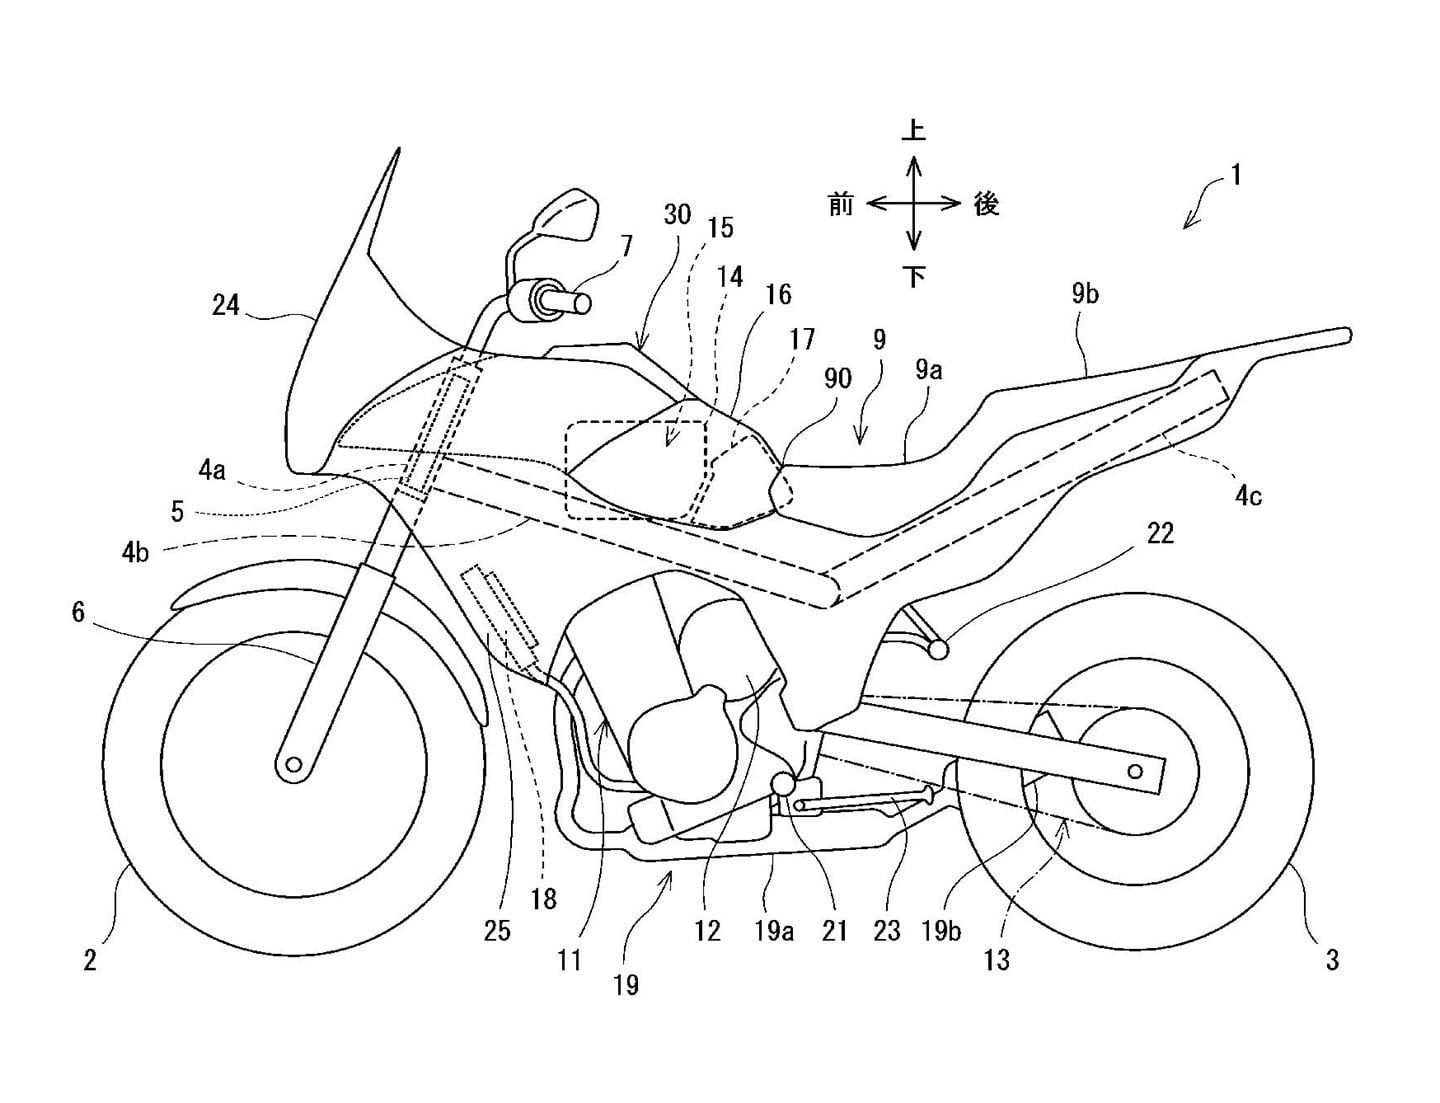 The second model Kawasaki submitted patents for is the Versys Hybrid.